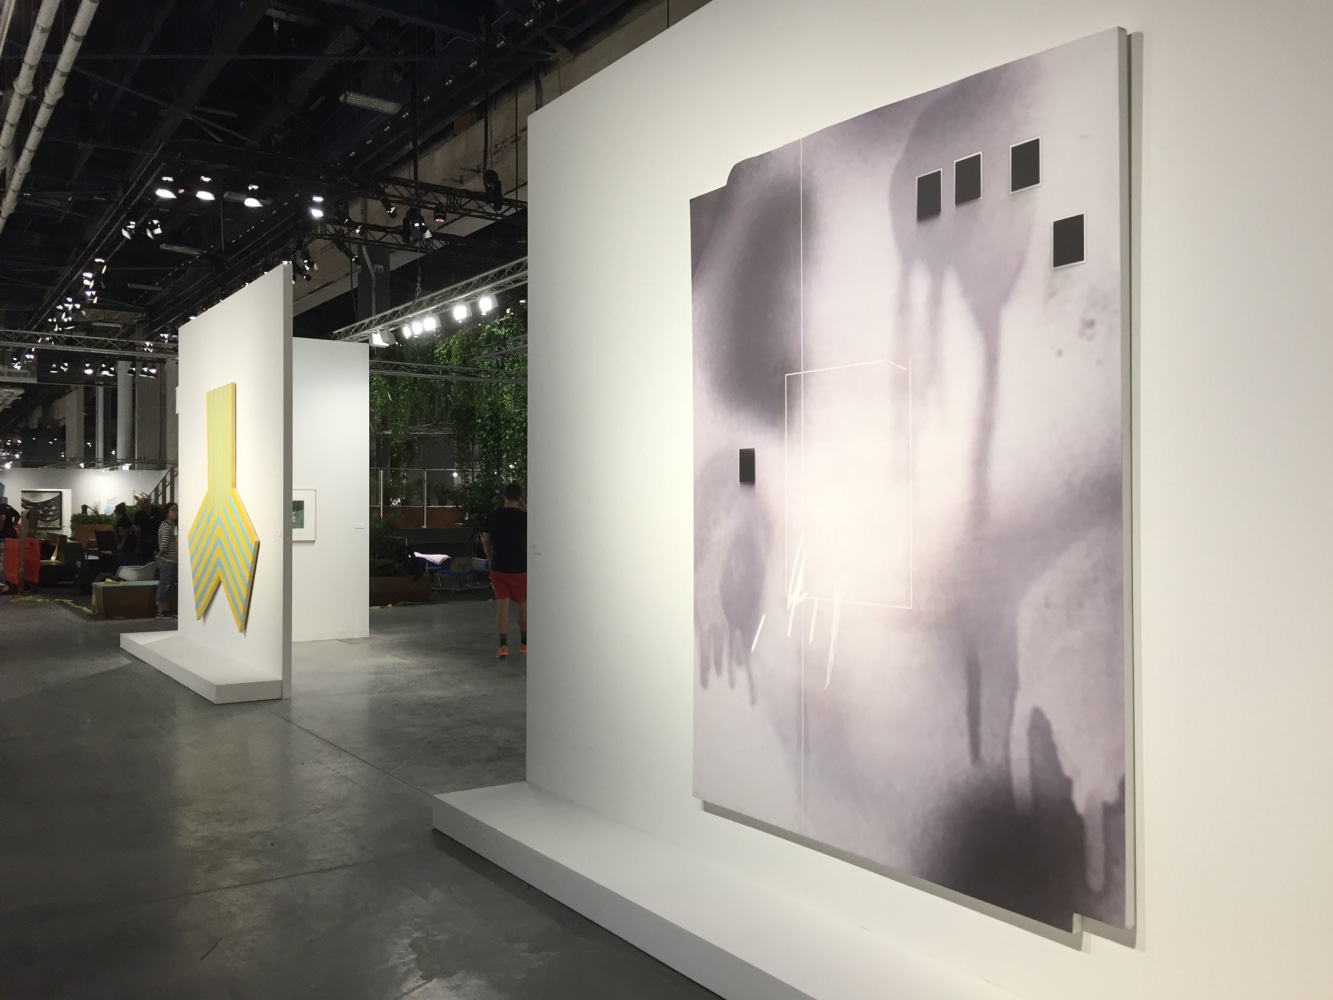 Luhring Augustine

Art Basel Miami Beach, Booth E11

Installation view

2017